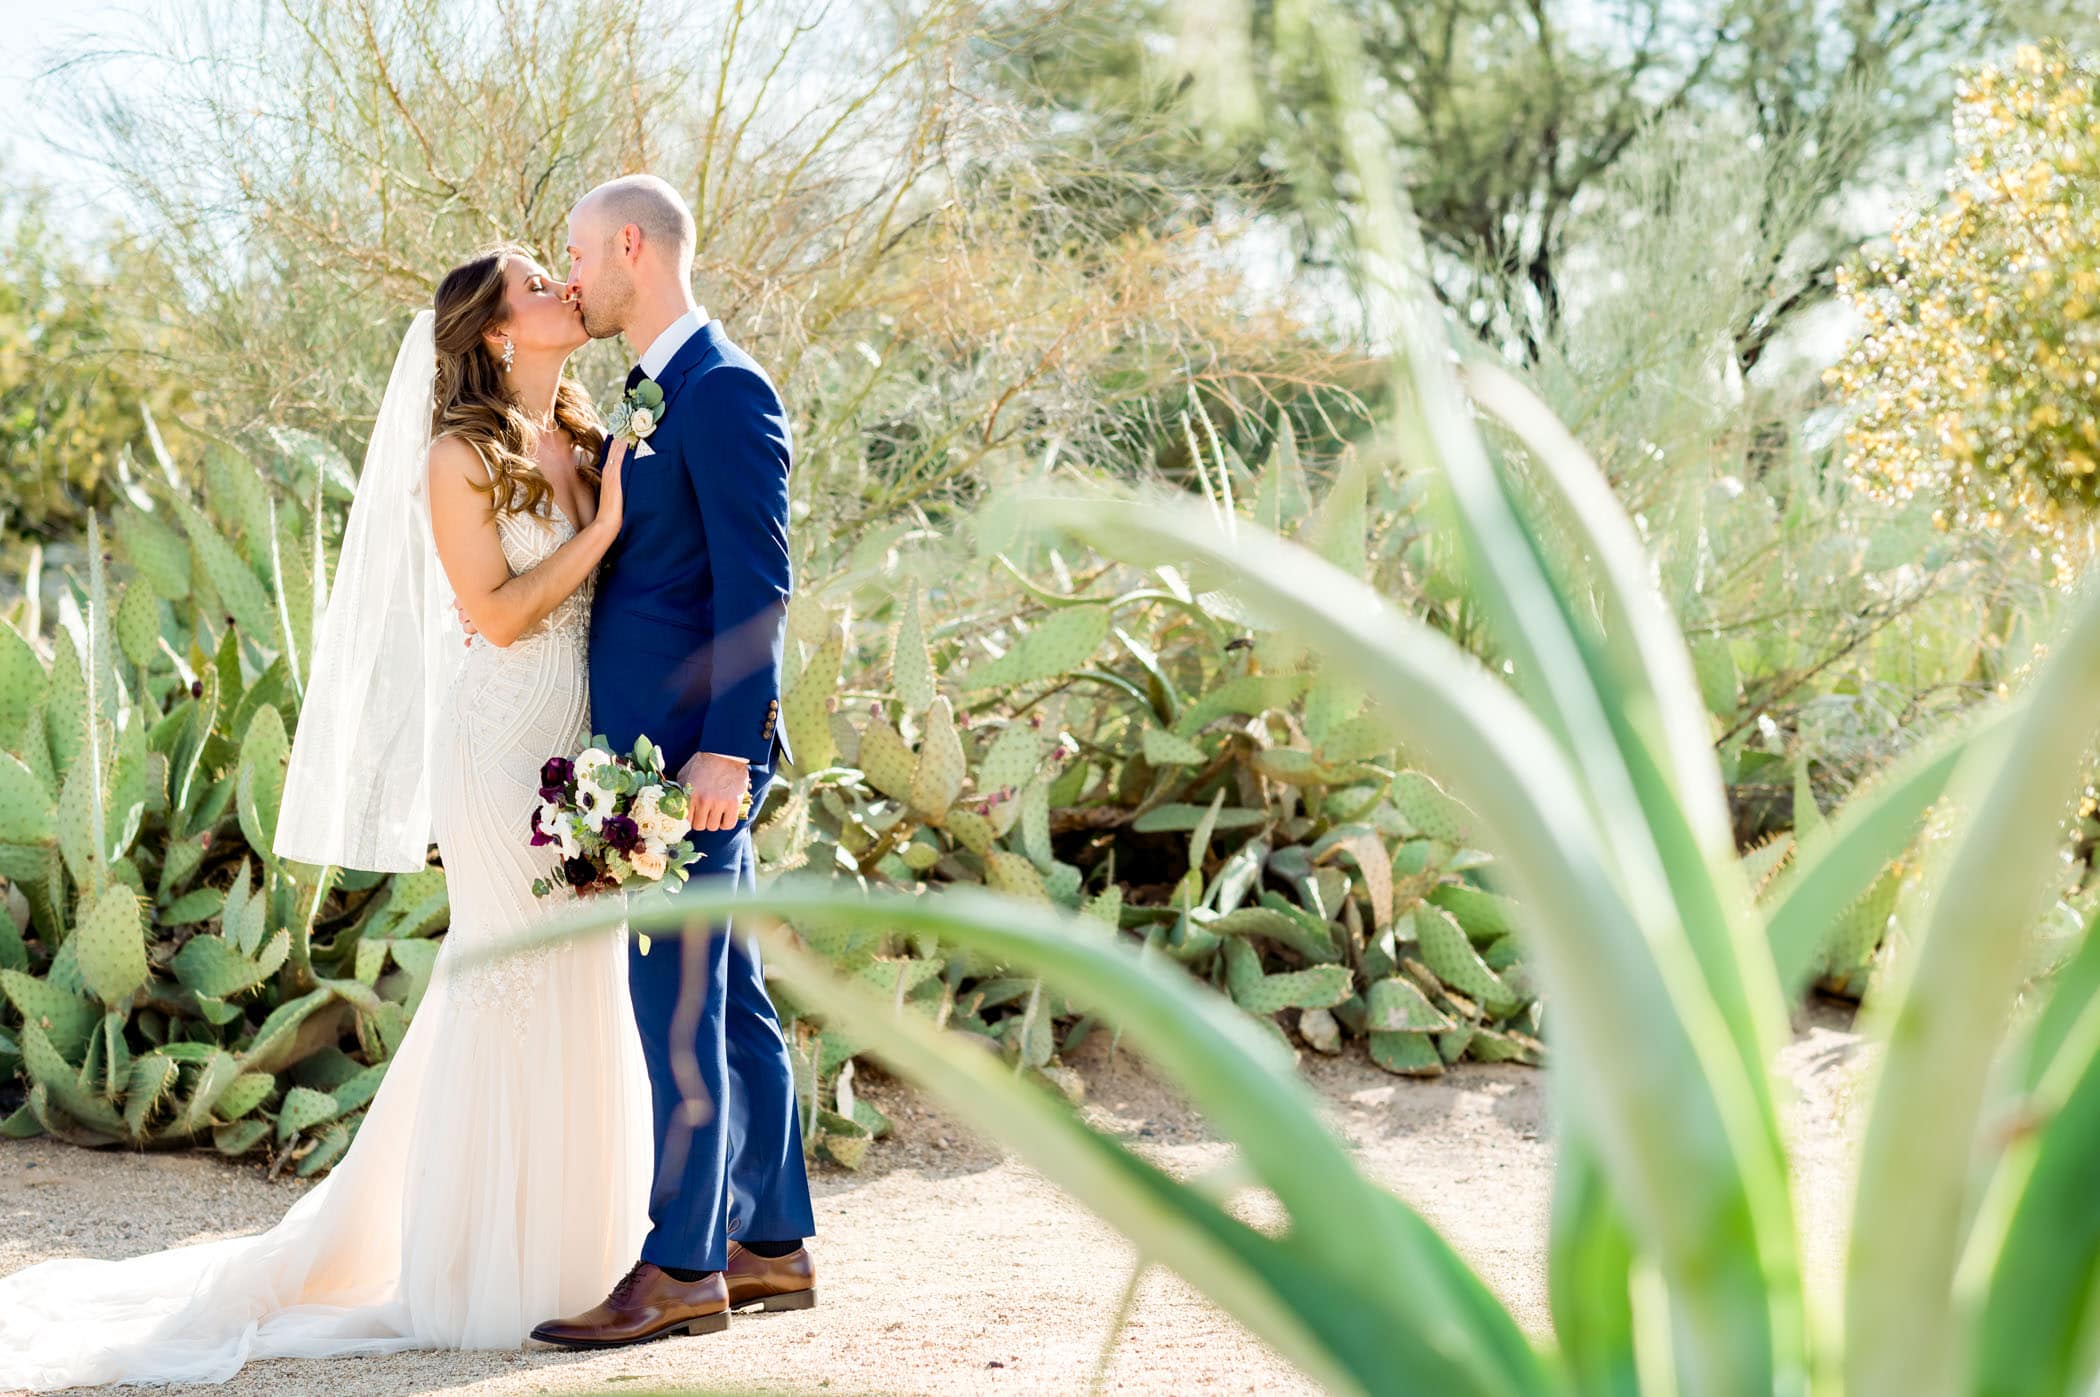 Bride and groom kissing surrounded by desert plants